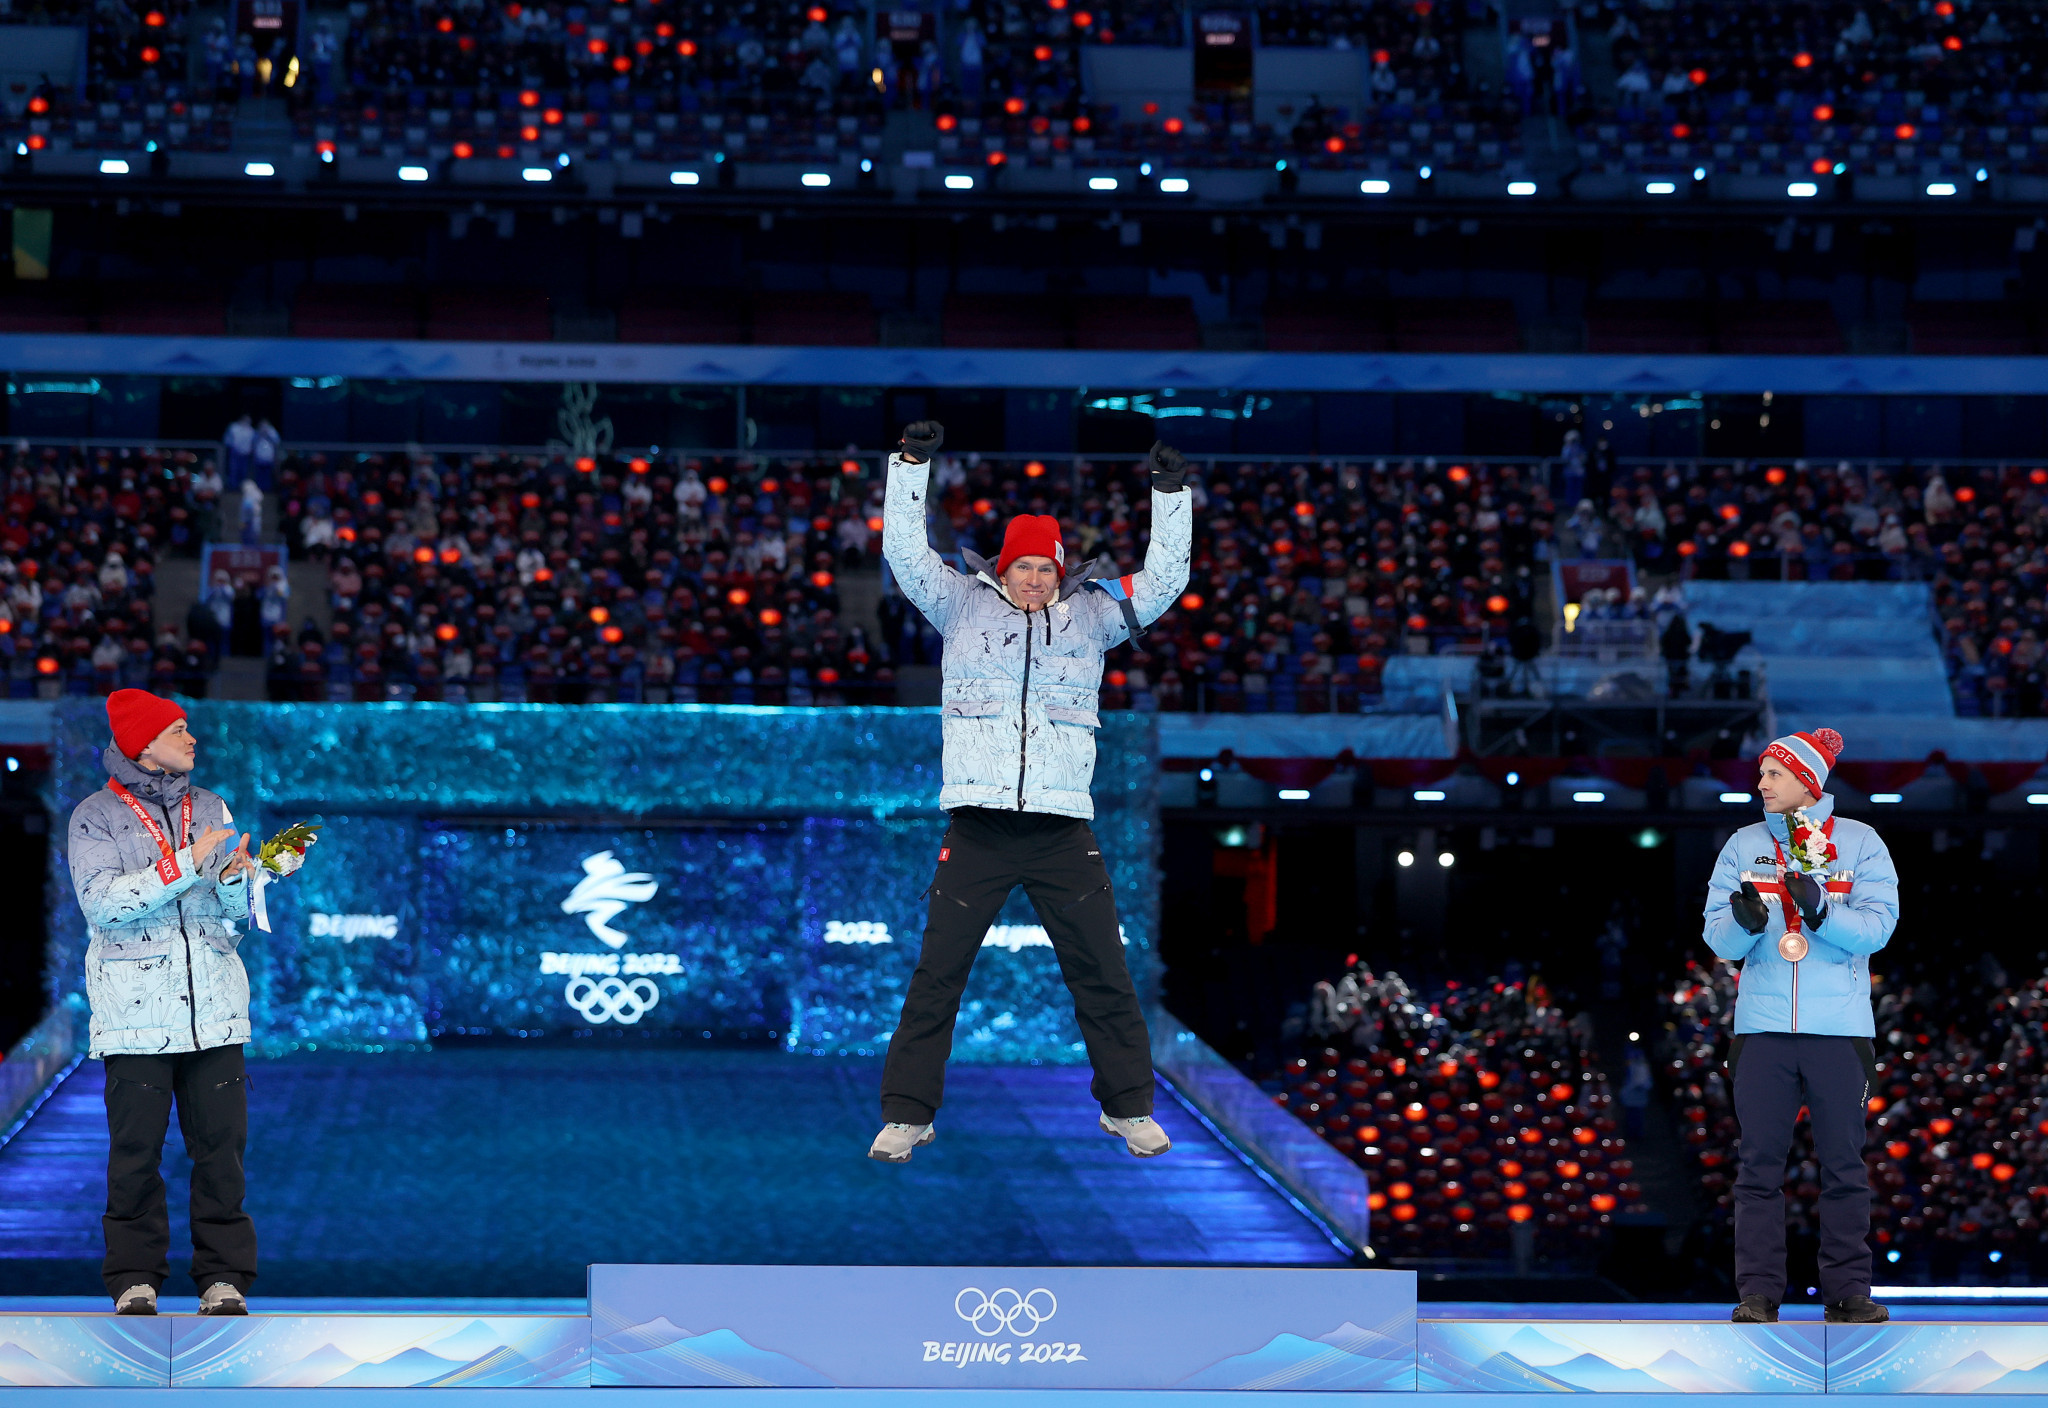 The last medal ceremony at Beijing 2022 was for cross-country skier Alexander Bolshunov ©Getty Images